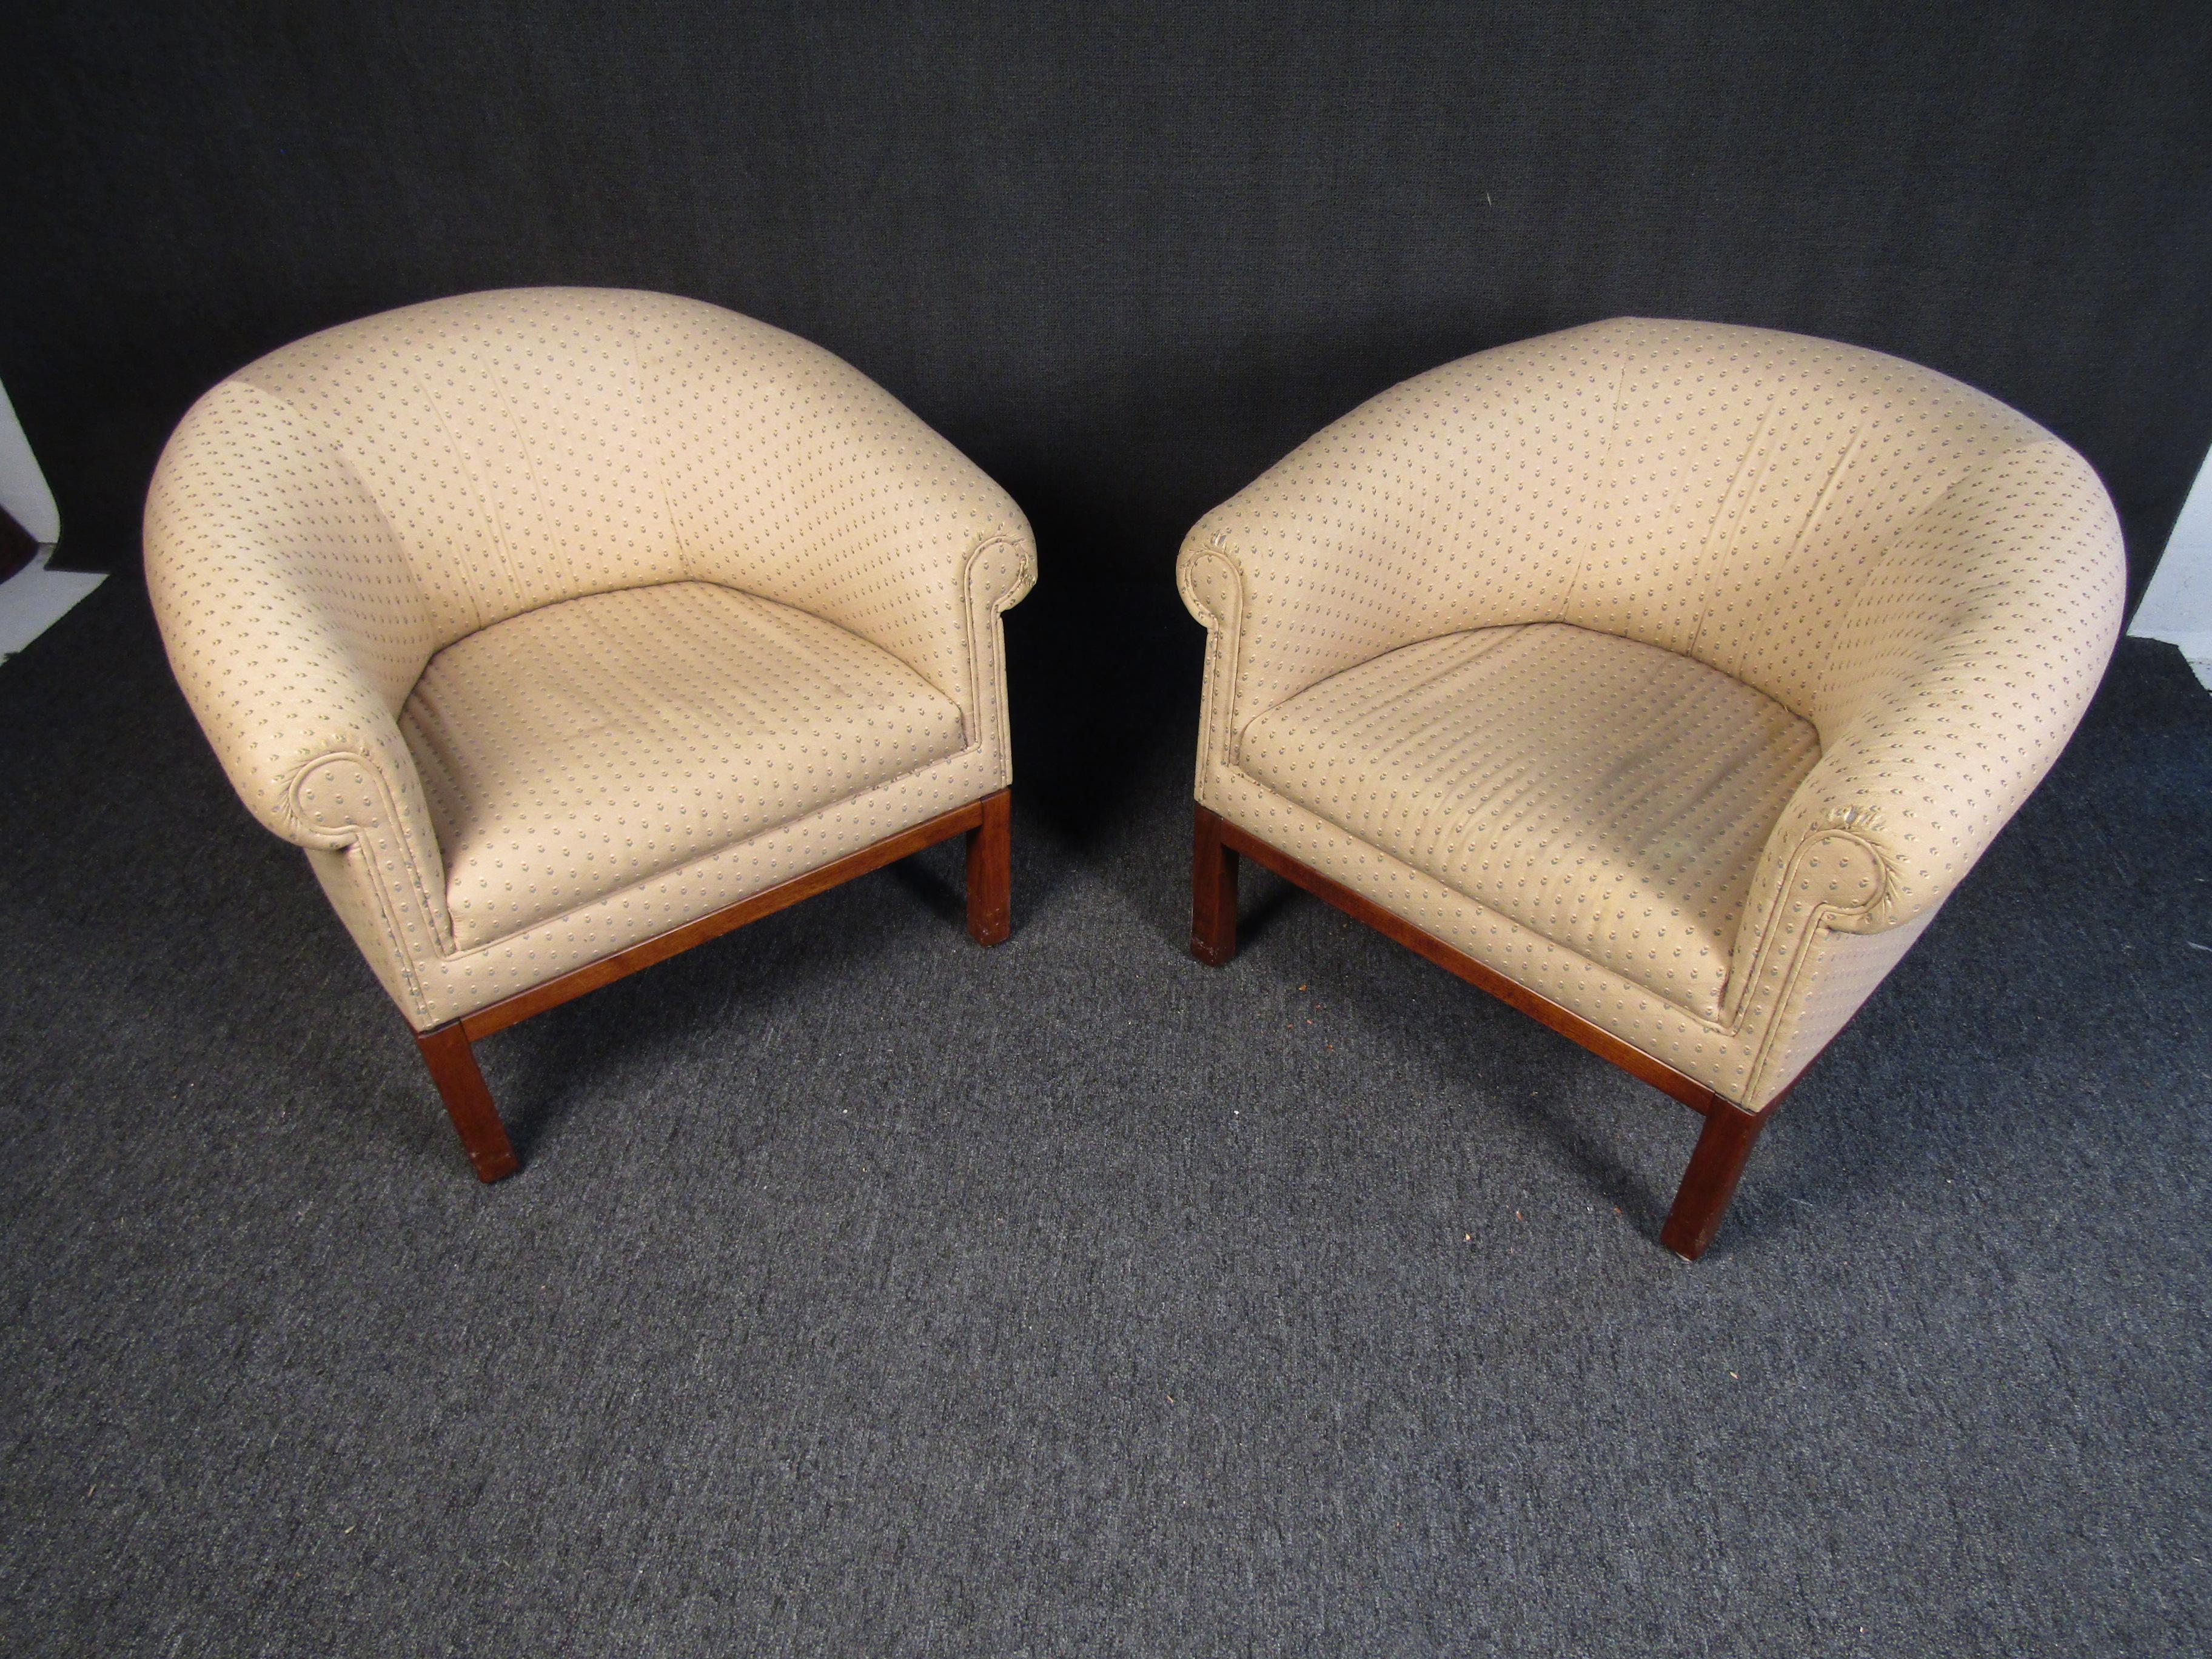 A pair of Mid-Century Modern lounge chairs that feature a subtle yet stylish upholstery complemented by a wooden frame and legs. The rounded and cushioned shape of the chairs offers comfort in classic Mid-Century style. Please confirm item location